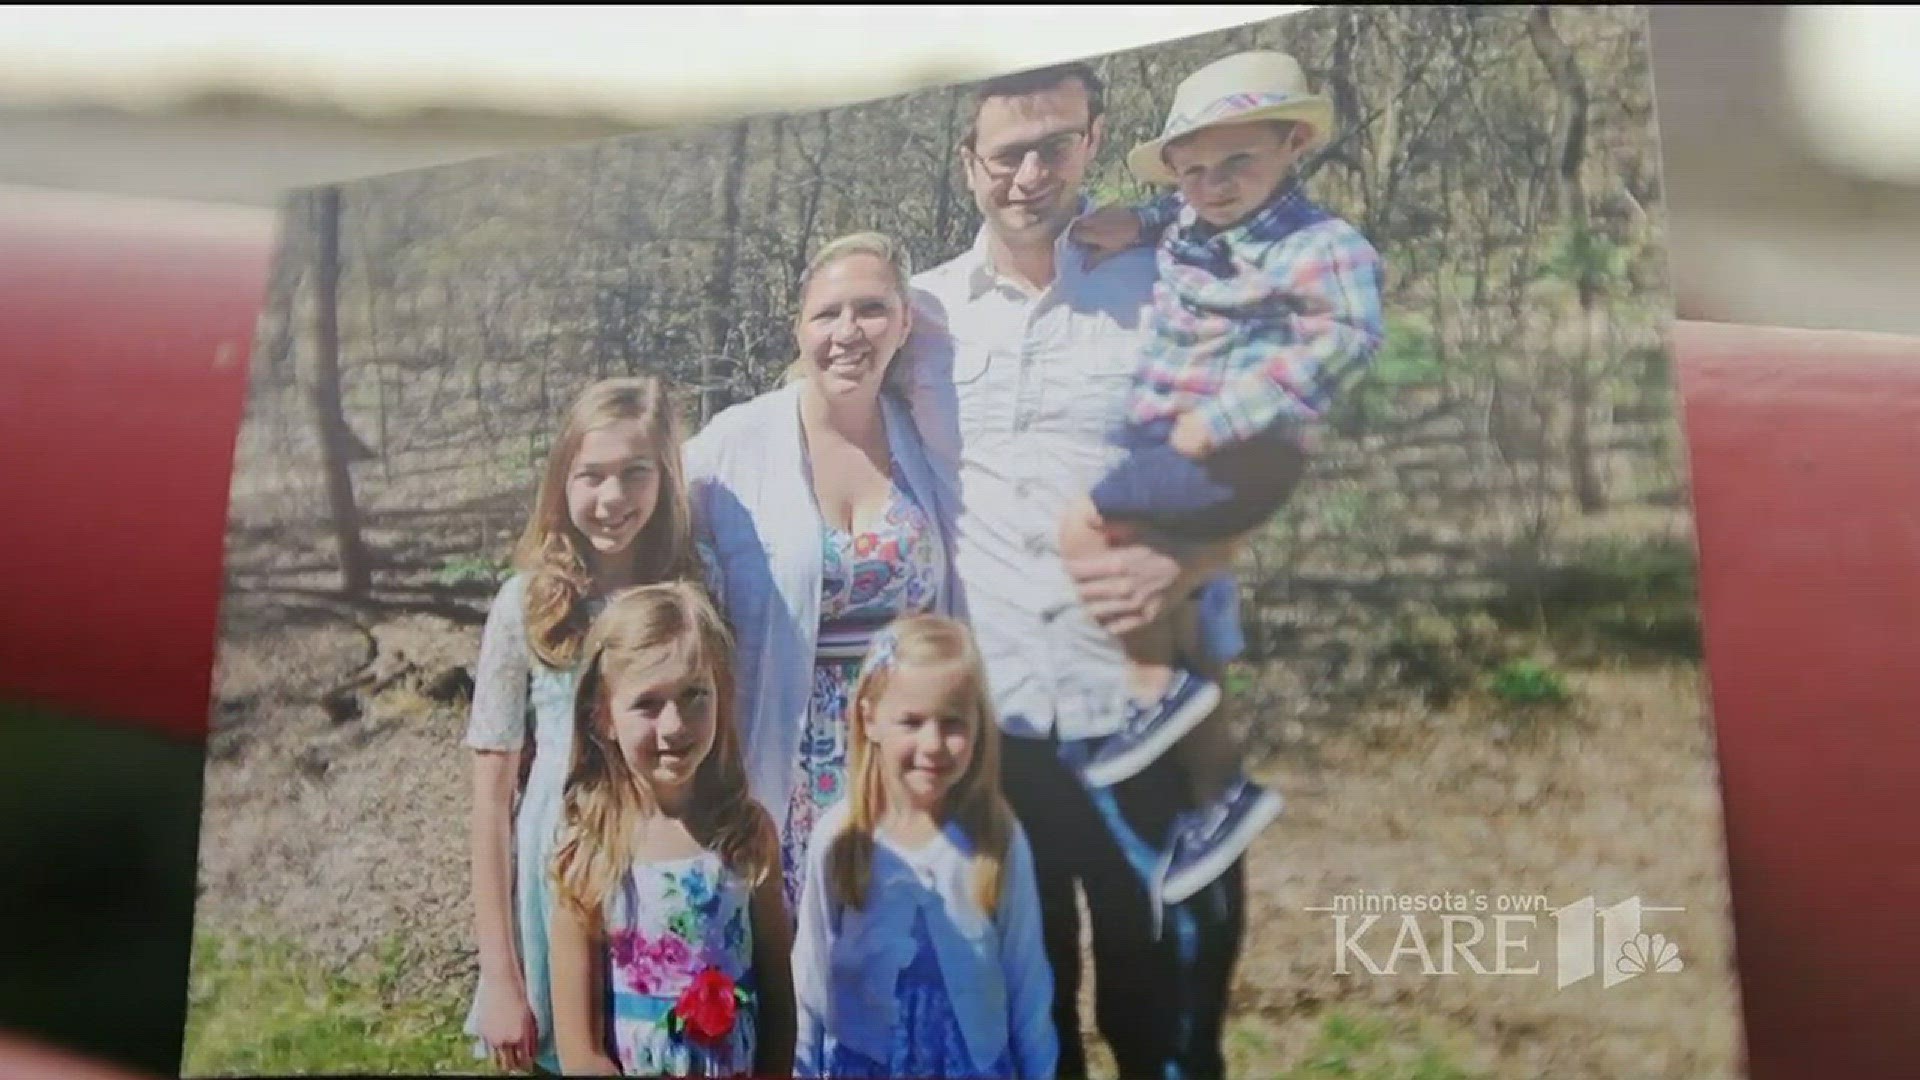 Survivors sat down with KARE 11 to share where they were that day, how it affected them, and where they are now. http://kare11.tv/2vkwOex